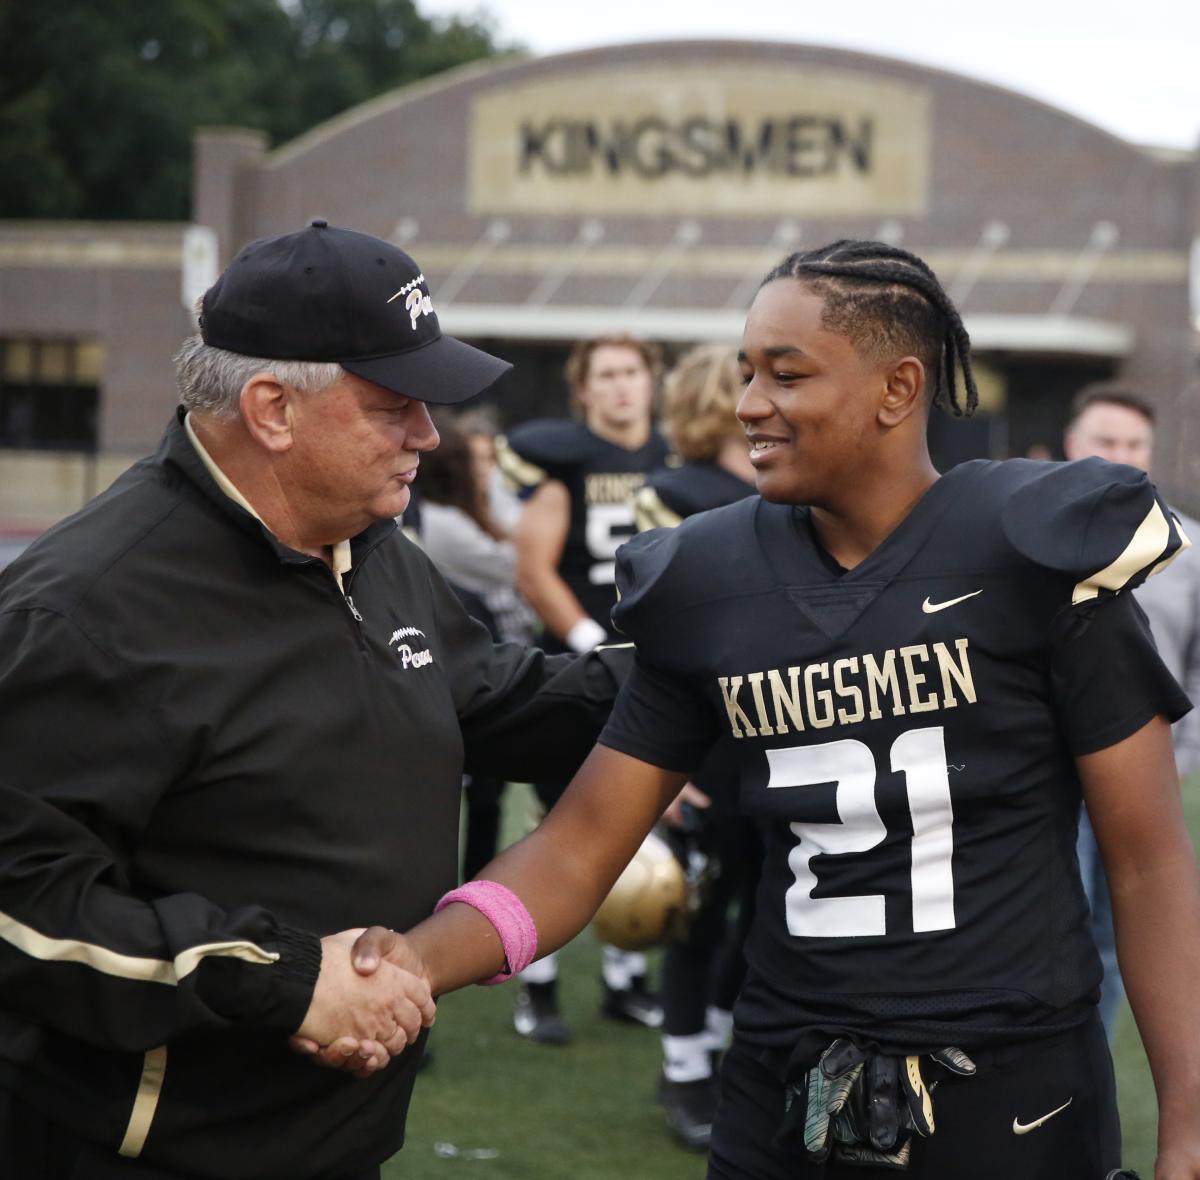 Coach Yeoman with Kingsmen player